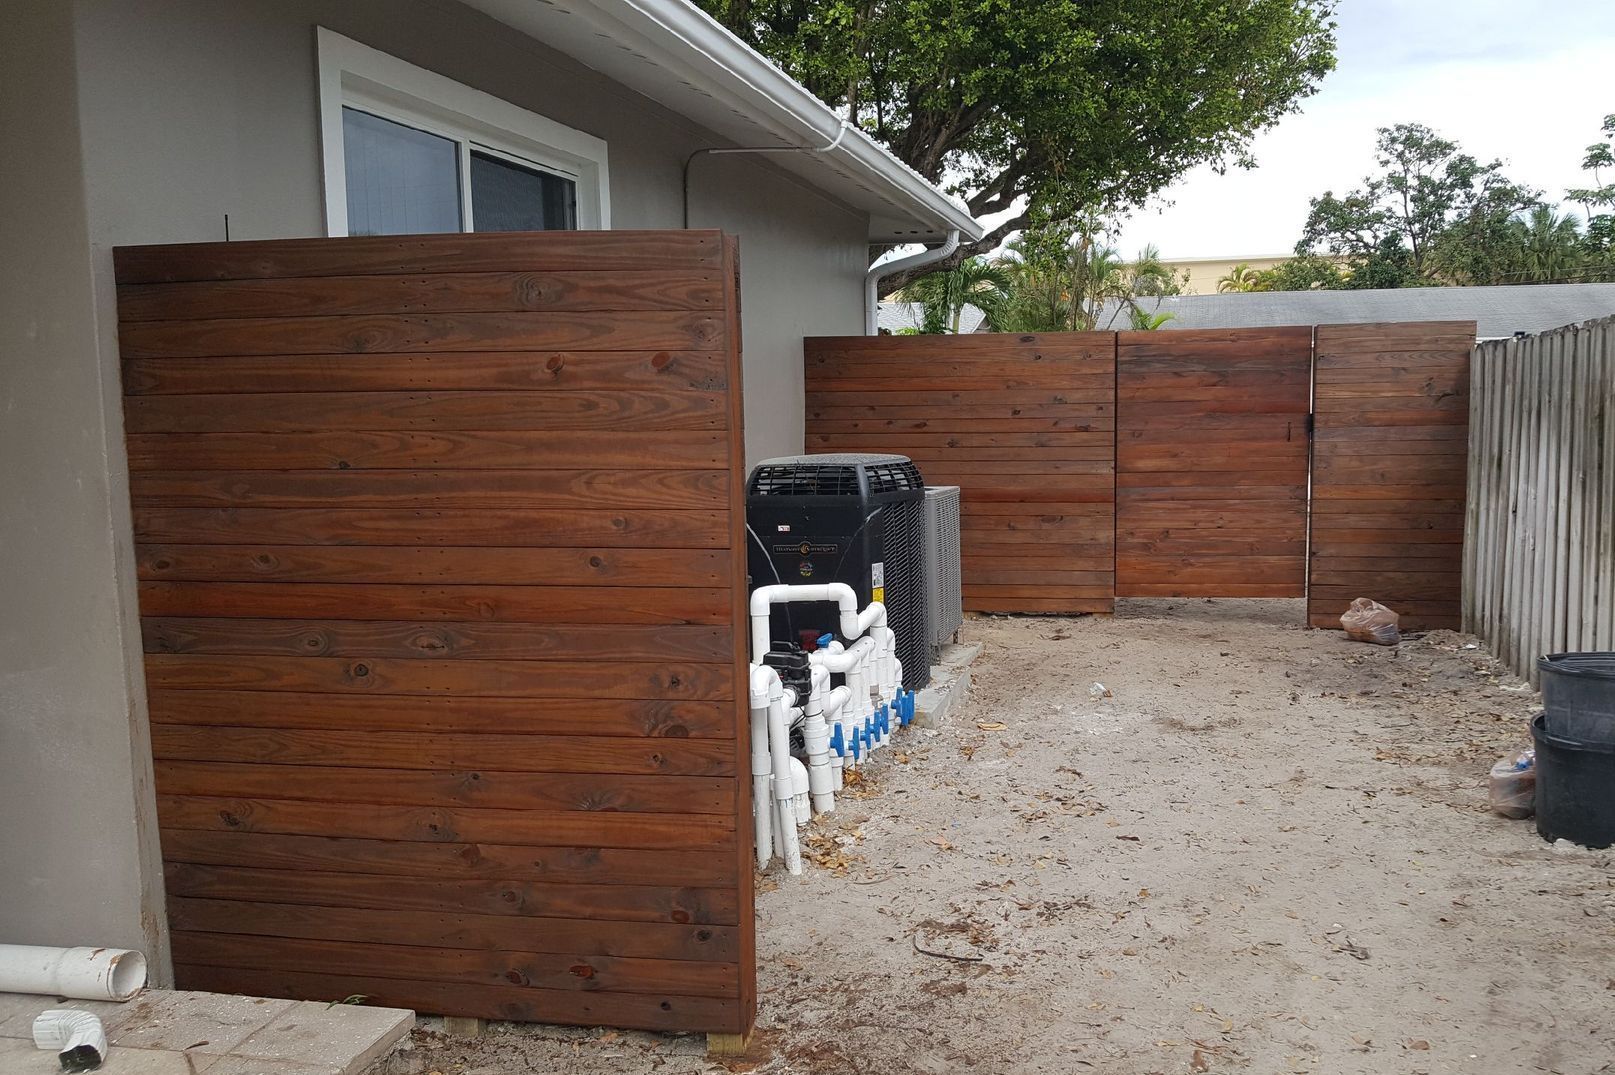 Fencing and privacy